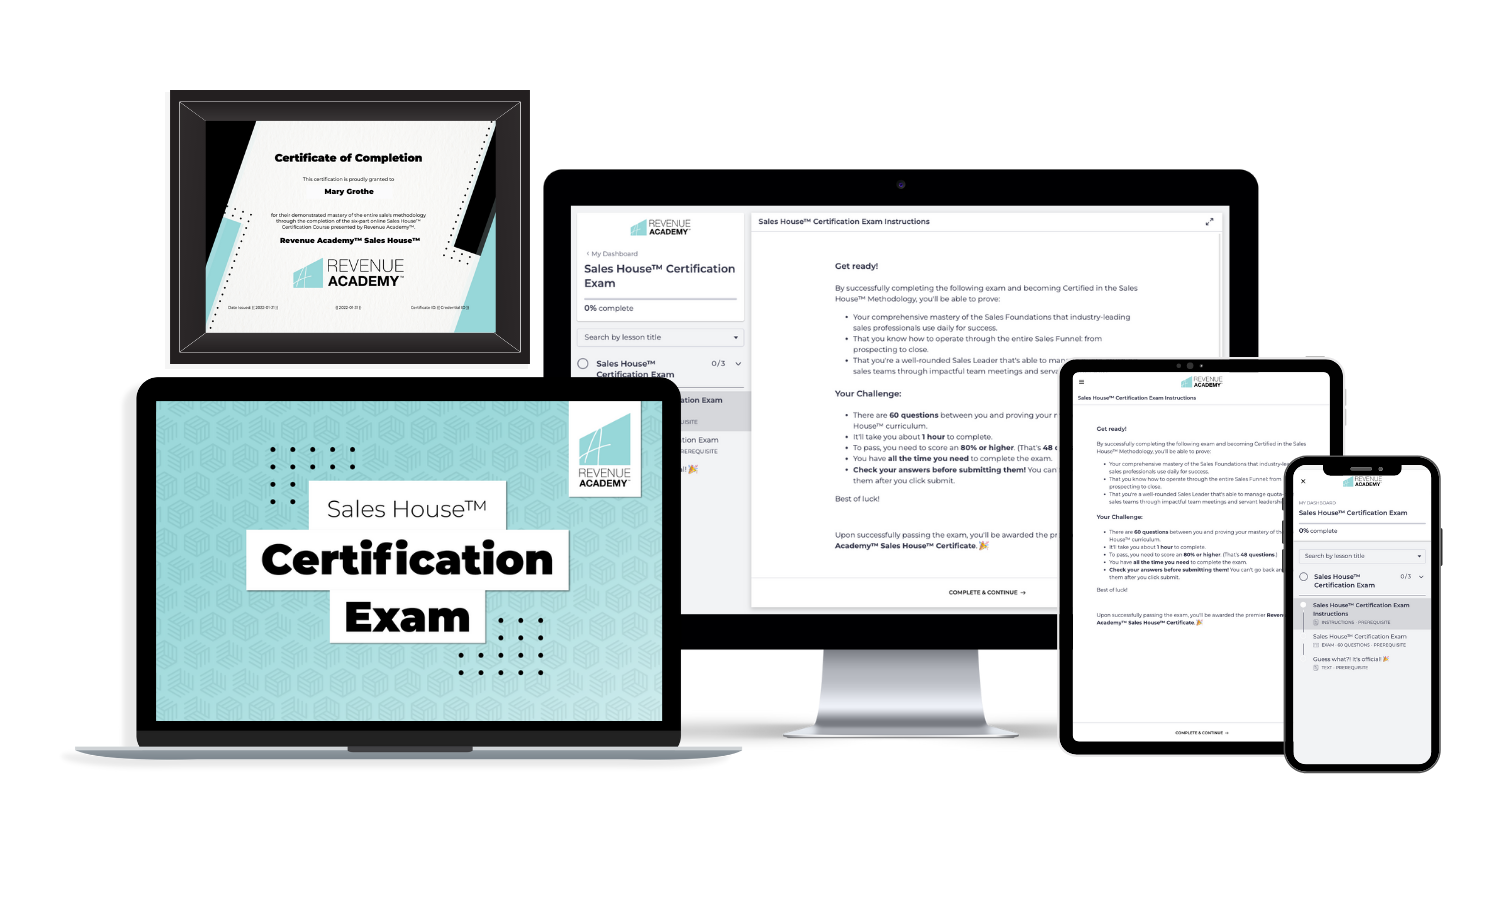 Sales House™ Certification Exam Graphic